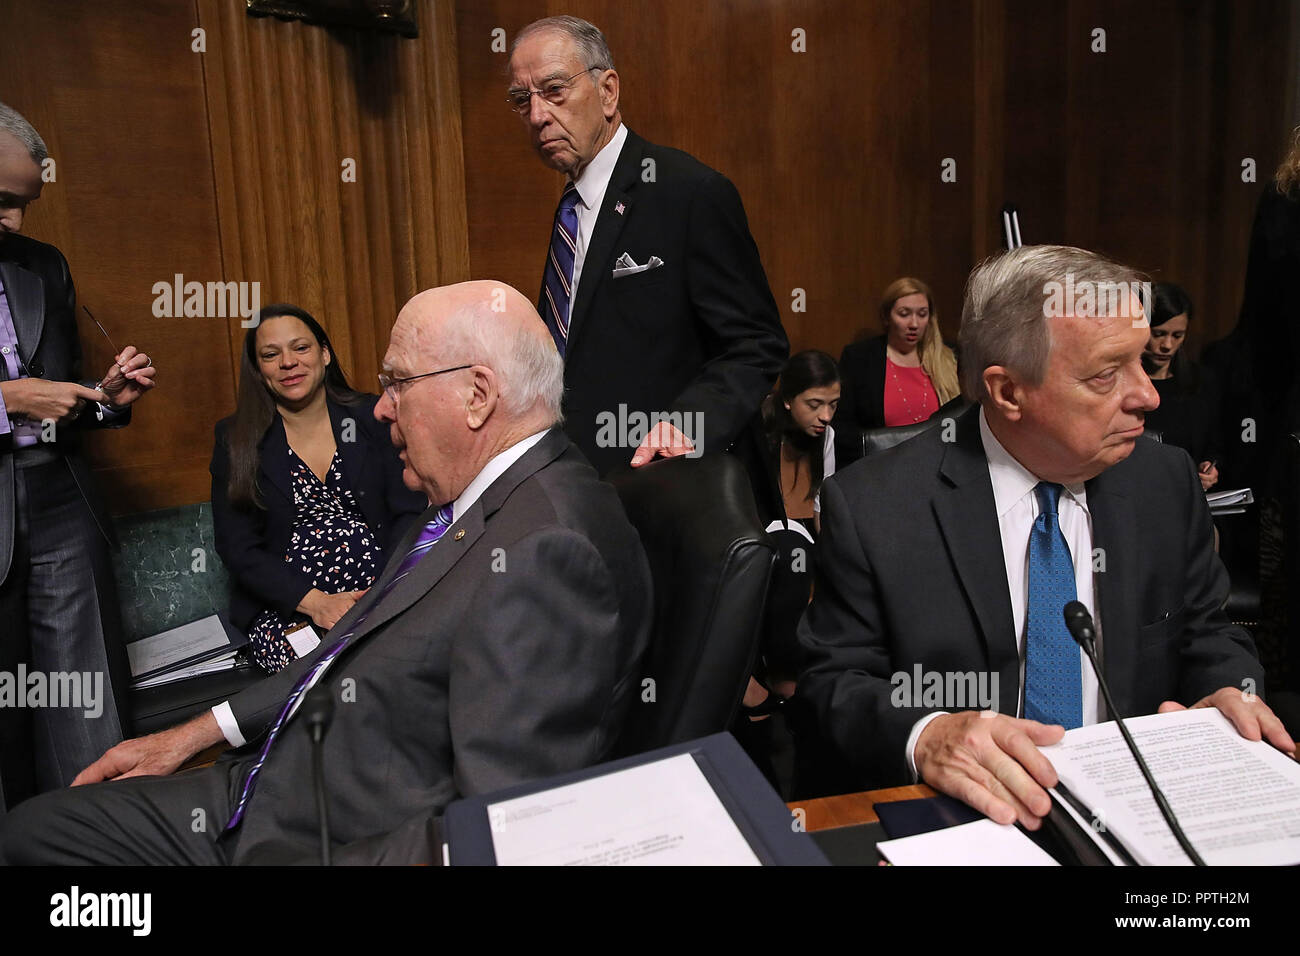 WASHINGTON, DC - SEPTEMBER 27: Senate Judiciary Committee Chairman Charles Grassley (R-IA) (C) and committee members Sen. Patrick Leahy (D-VT) (L) and Sen. Richard Durbin (D-IL) prepare for the arrival of Christine Blasey Ford in the Dirksen Senate Office Building on Capitol Hill September 27, 2018 in Washington, DC. A professor at Palo Alto University and a research psychologist at the Stanford University School of Medicine, Ford has accused Supreme Court nominee Judge Brett Kavanaugh of sexually assaulting her during a party in 1982 when they were high school students in suburban Maryland. Stock Photo